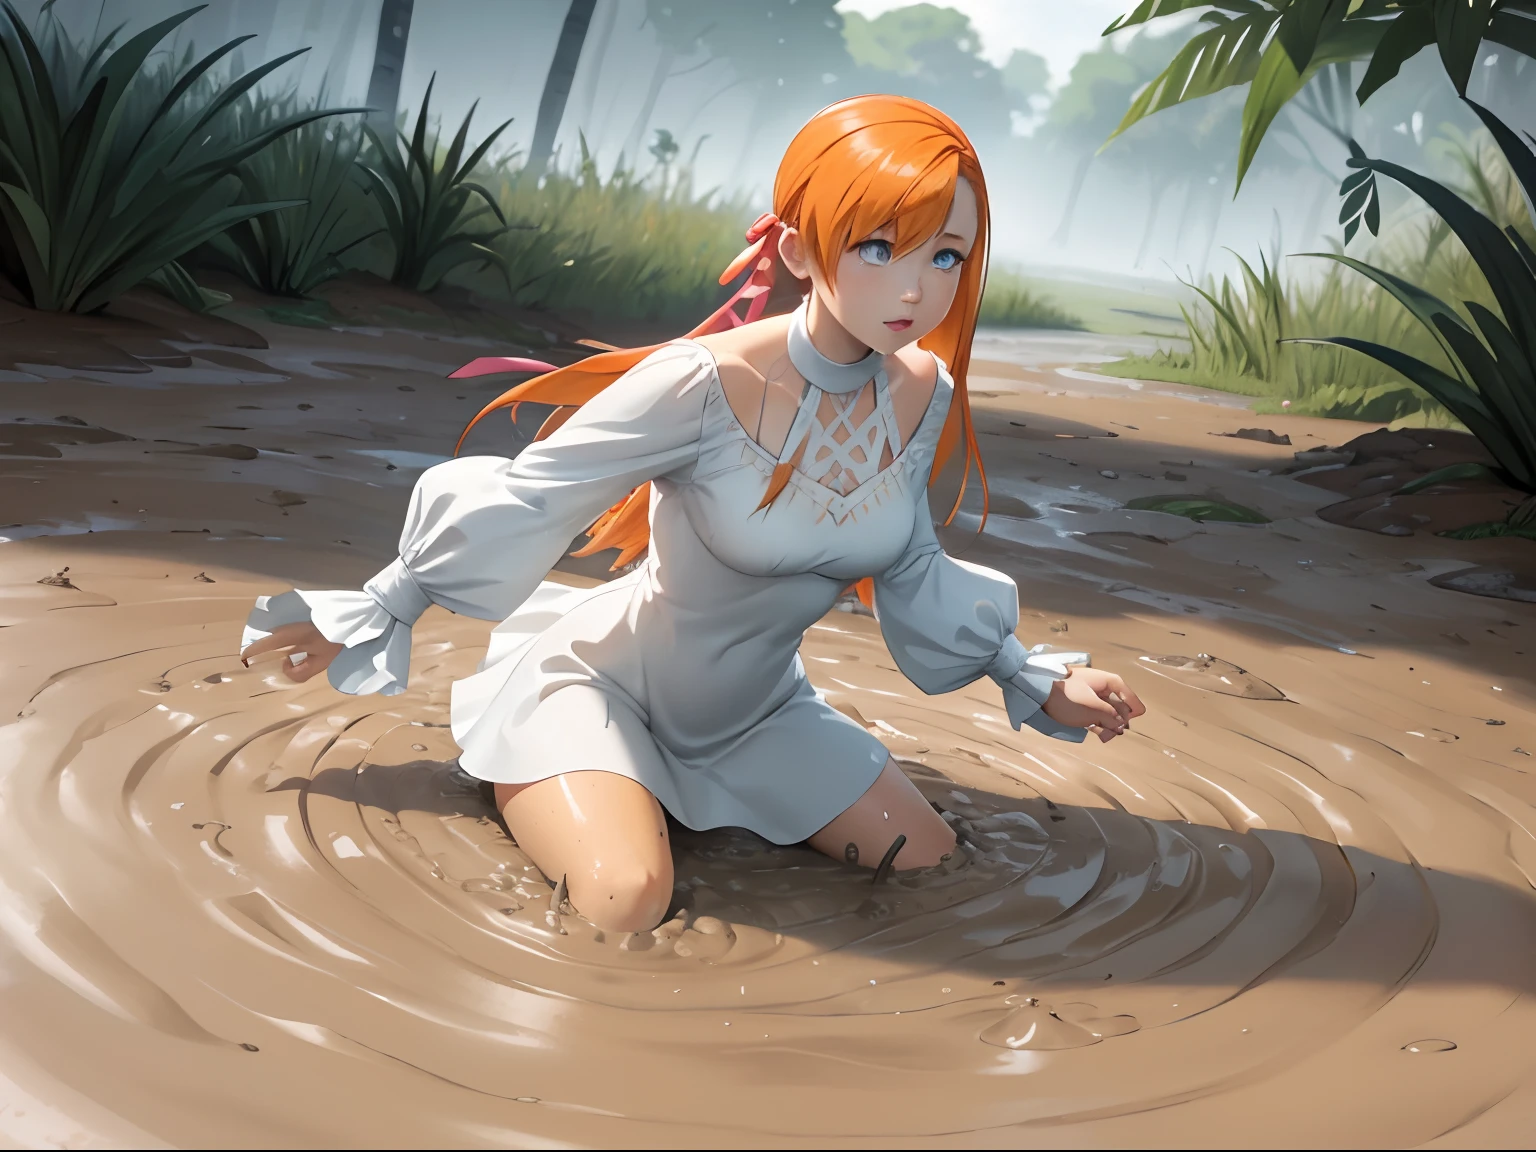 ryne, orange hair ribbon, white dress, upper body, movement stuck in a bottomless thick mud puddle, worried face, trying to get out, background: jungle swamp covered by thick fog